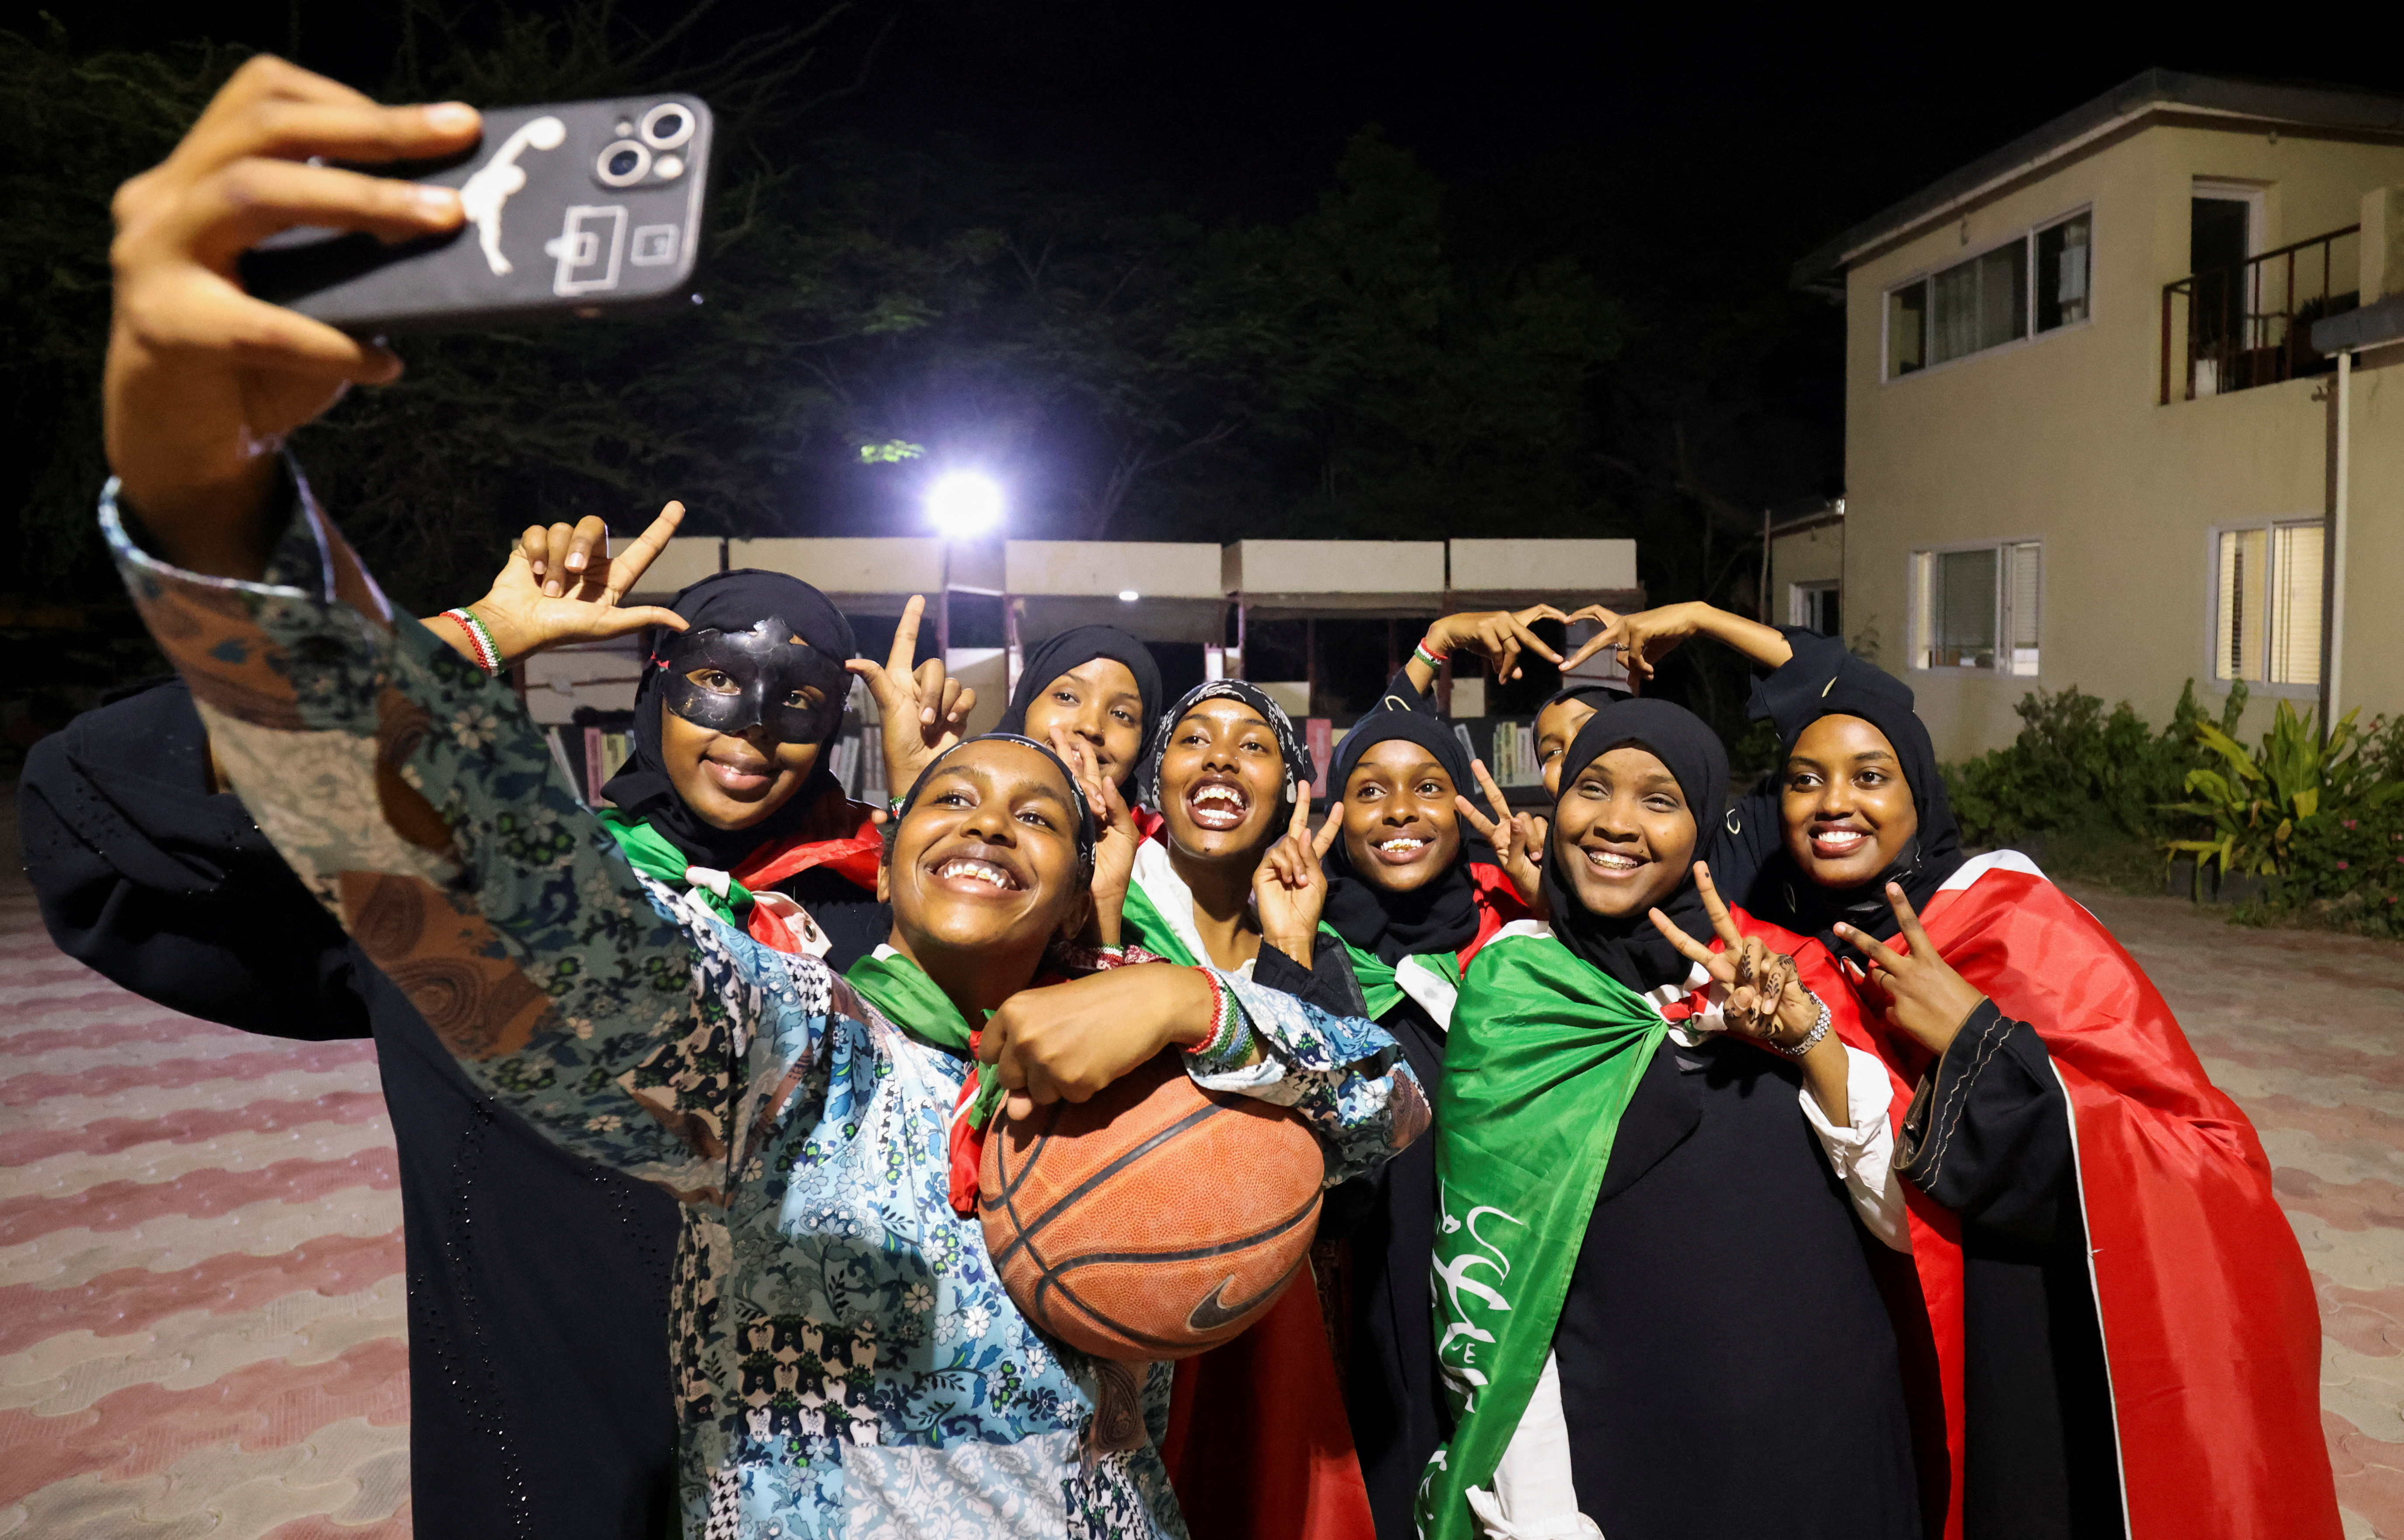 Somaliland's first all girls basketball team playing for their independence